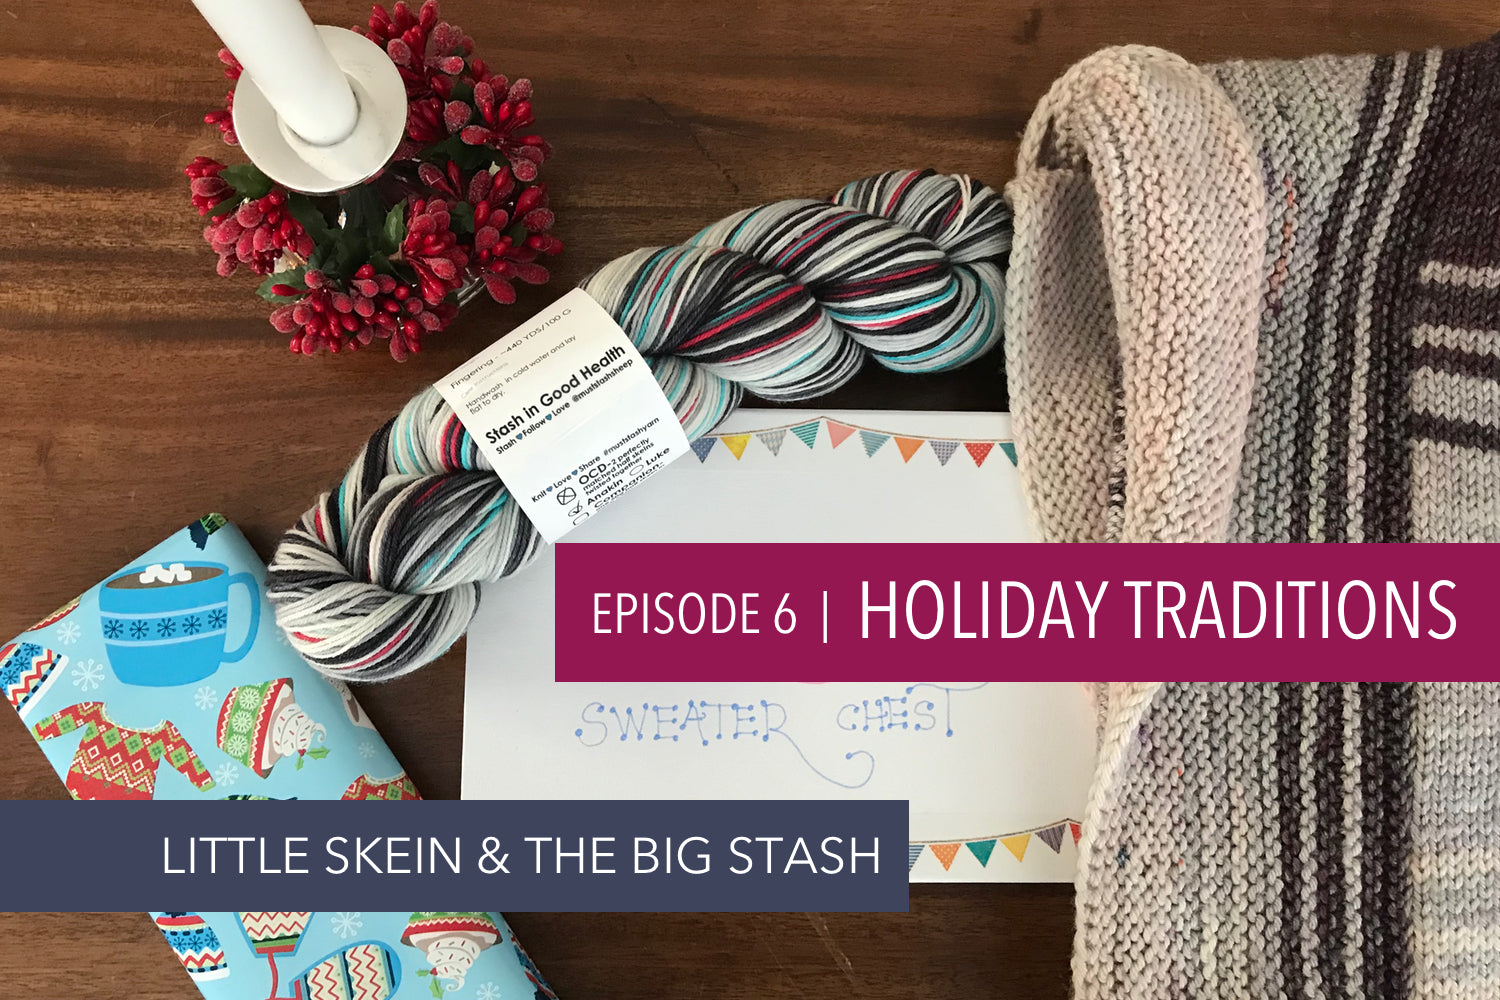 Episode 6: Holiday Traditions